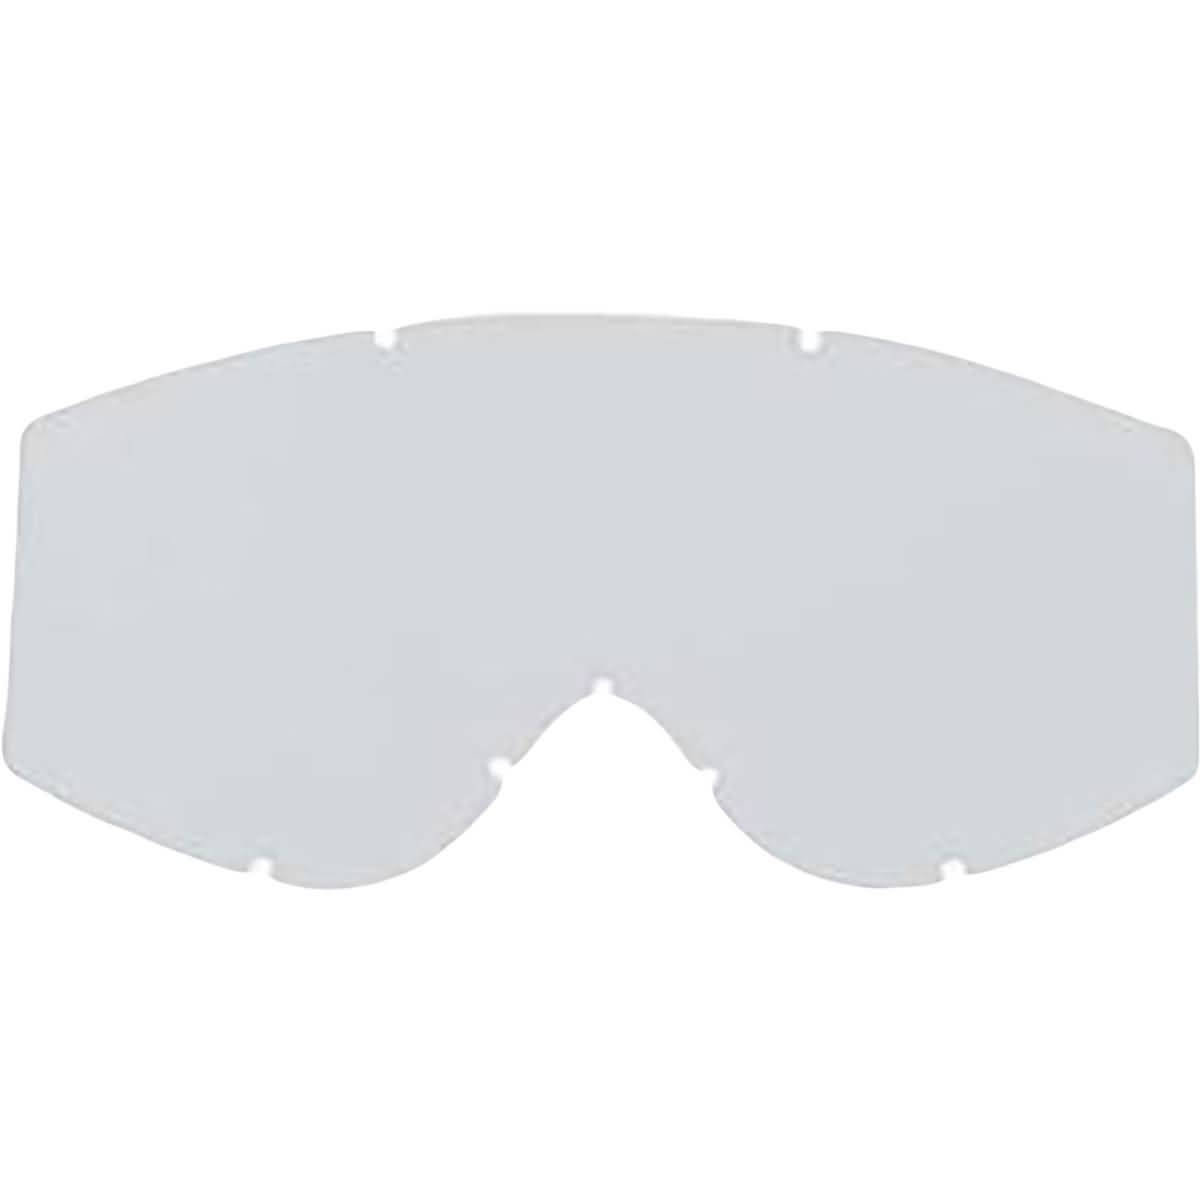 MSR Racing 7-Pin Replacement Lens Goggles Accessories-55-0555